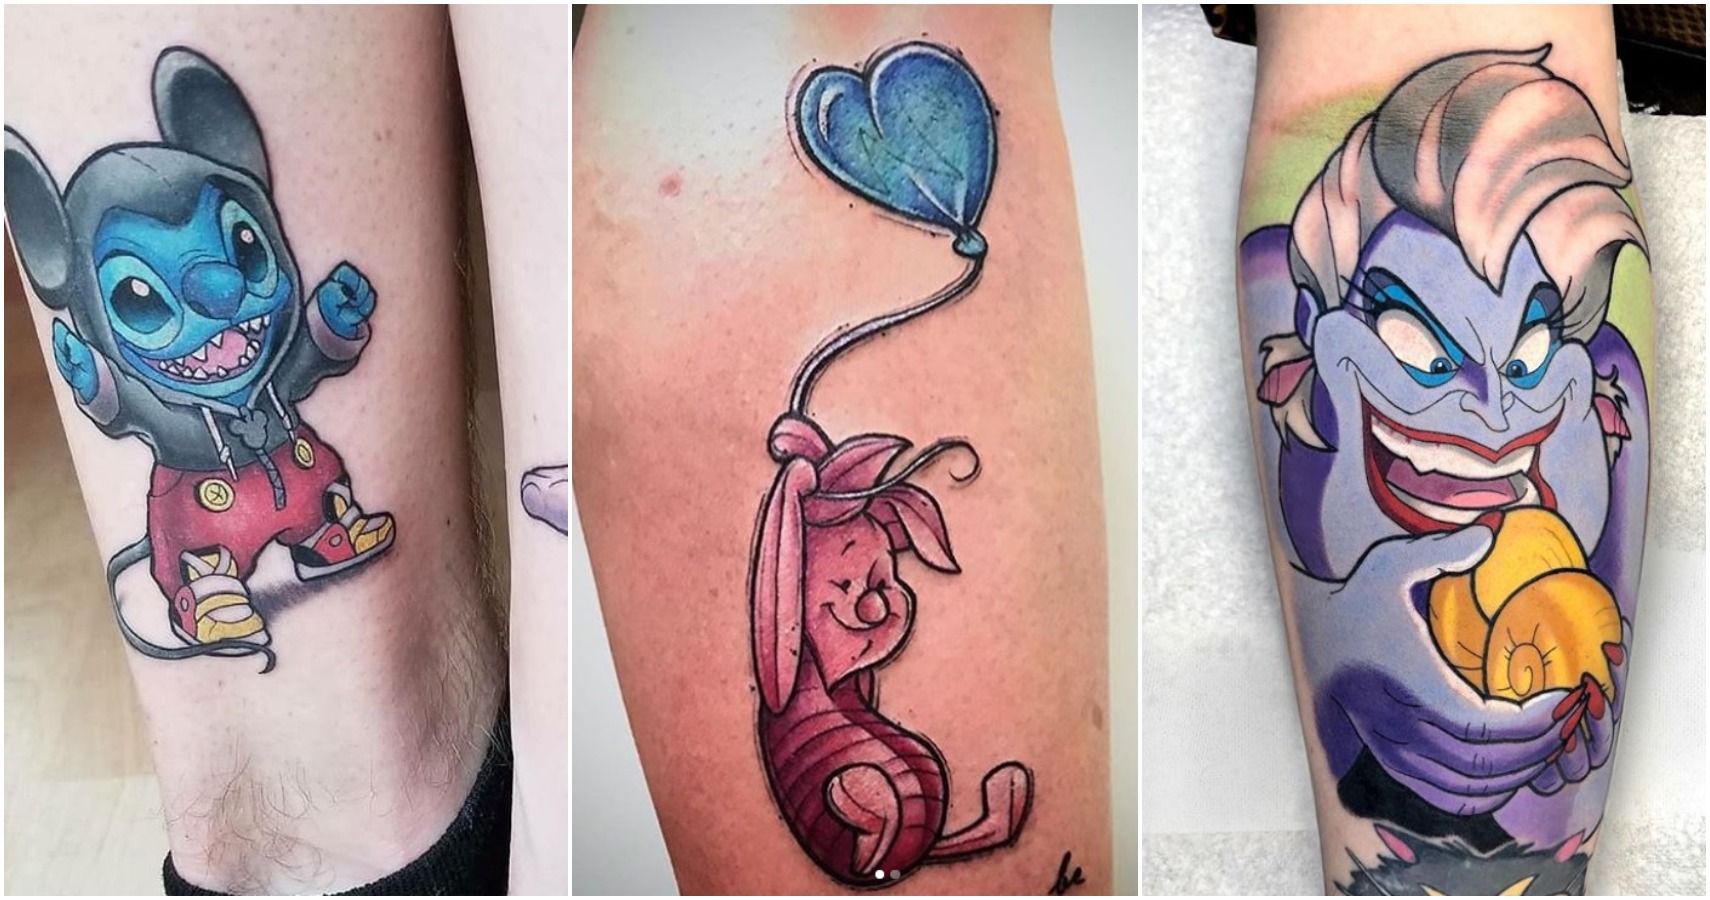 Disney Tattoos | Page 82 | The DIS Disney Discussion Forums - DISboards.com